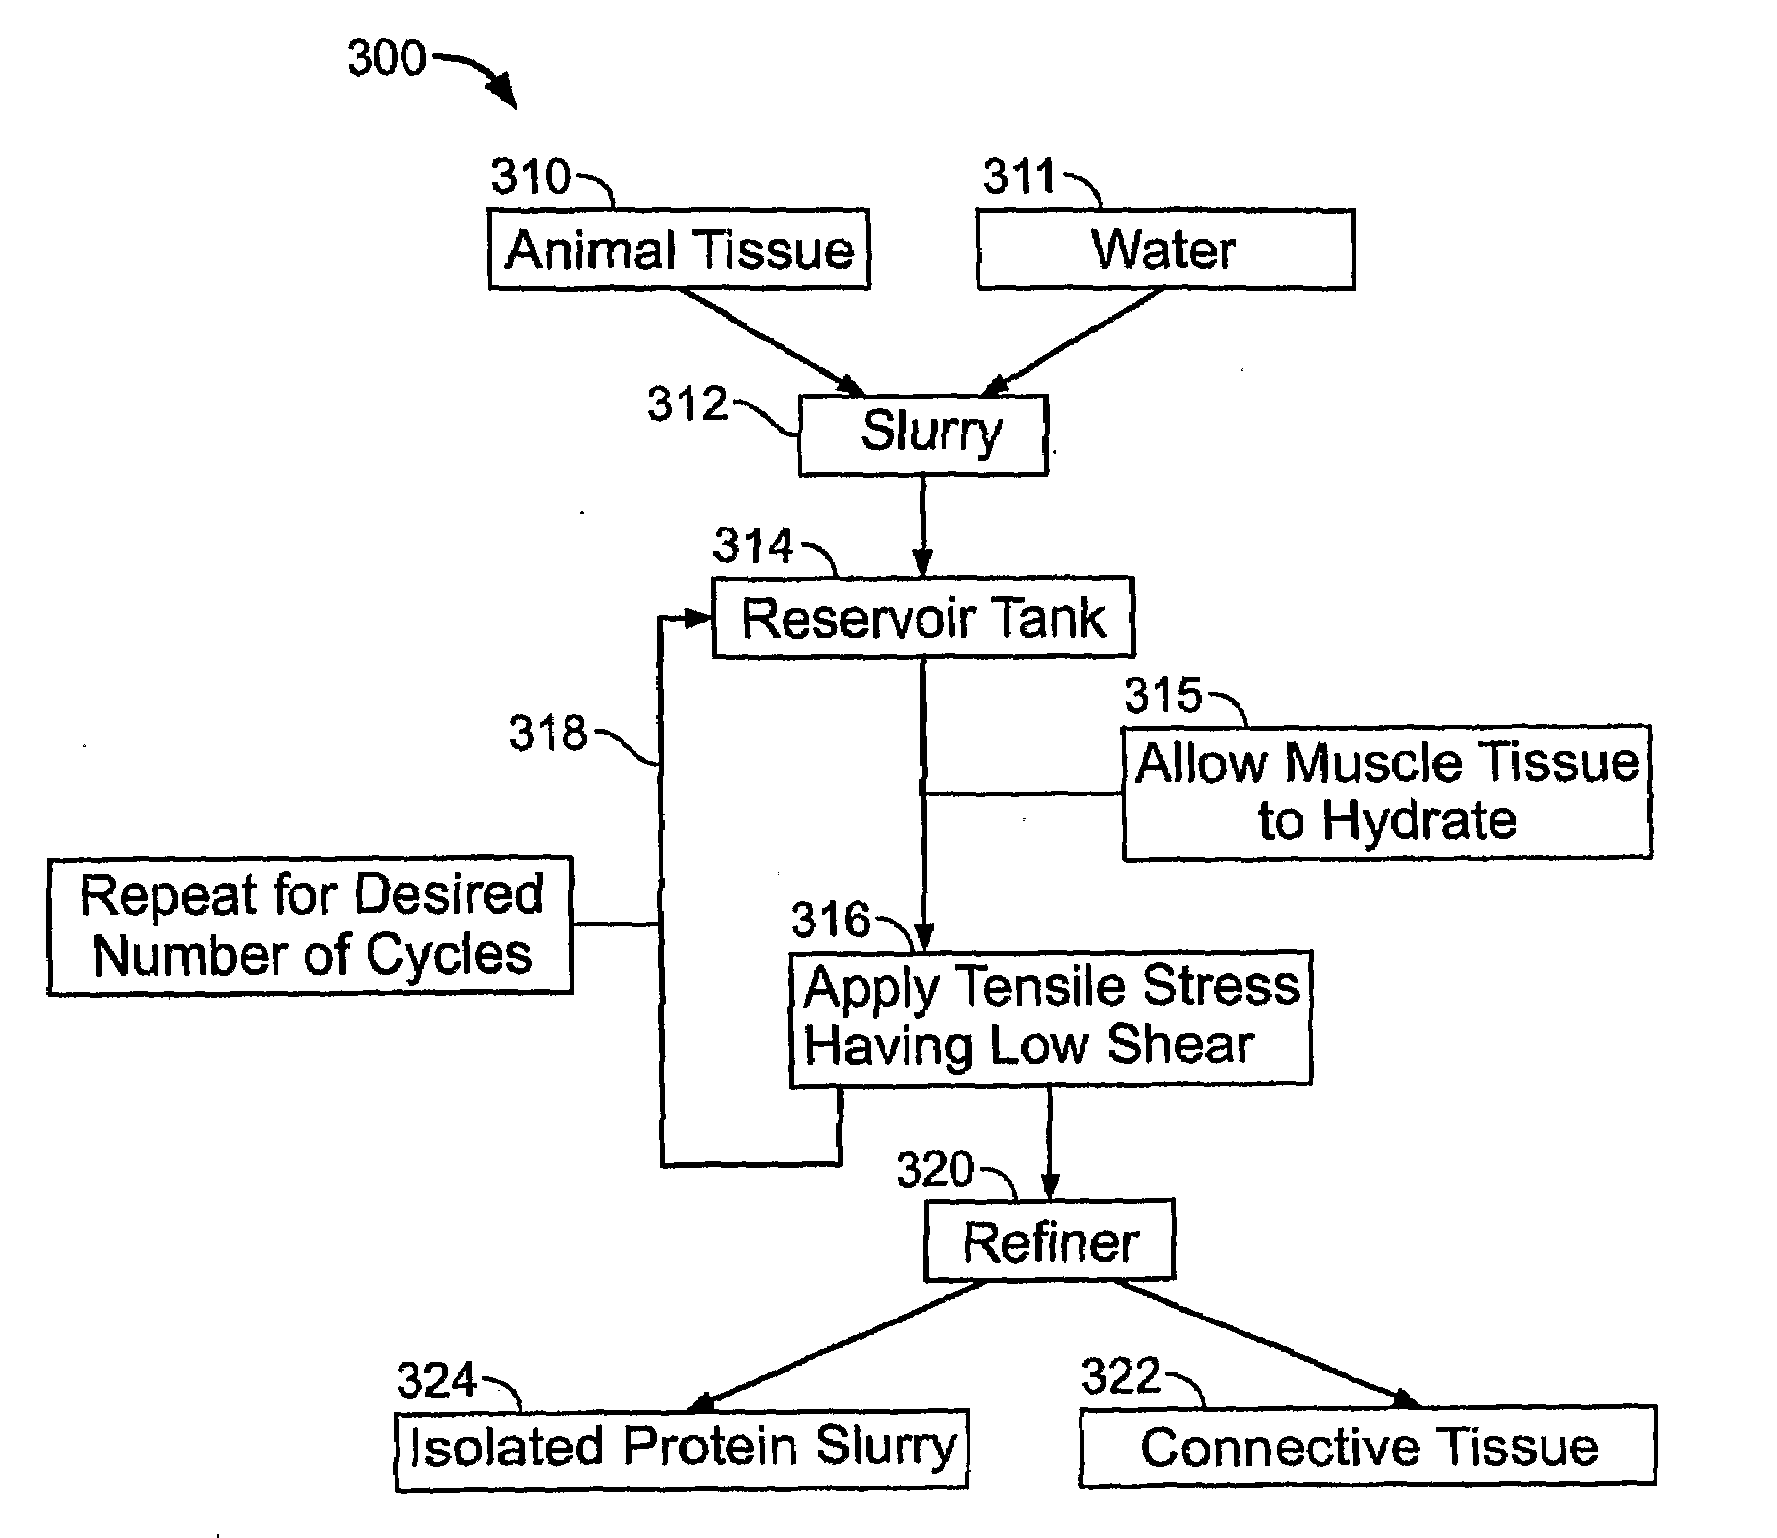 Systems and Methods For Separating Proteins From Connective Tissue